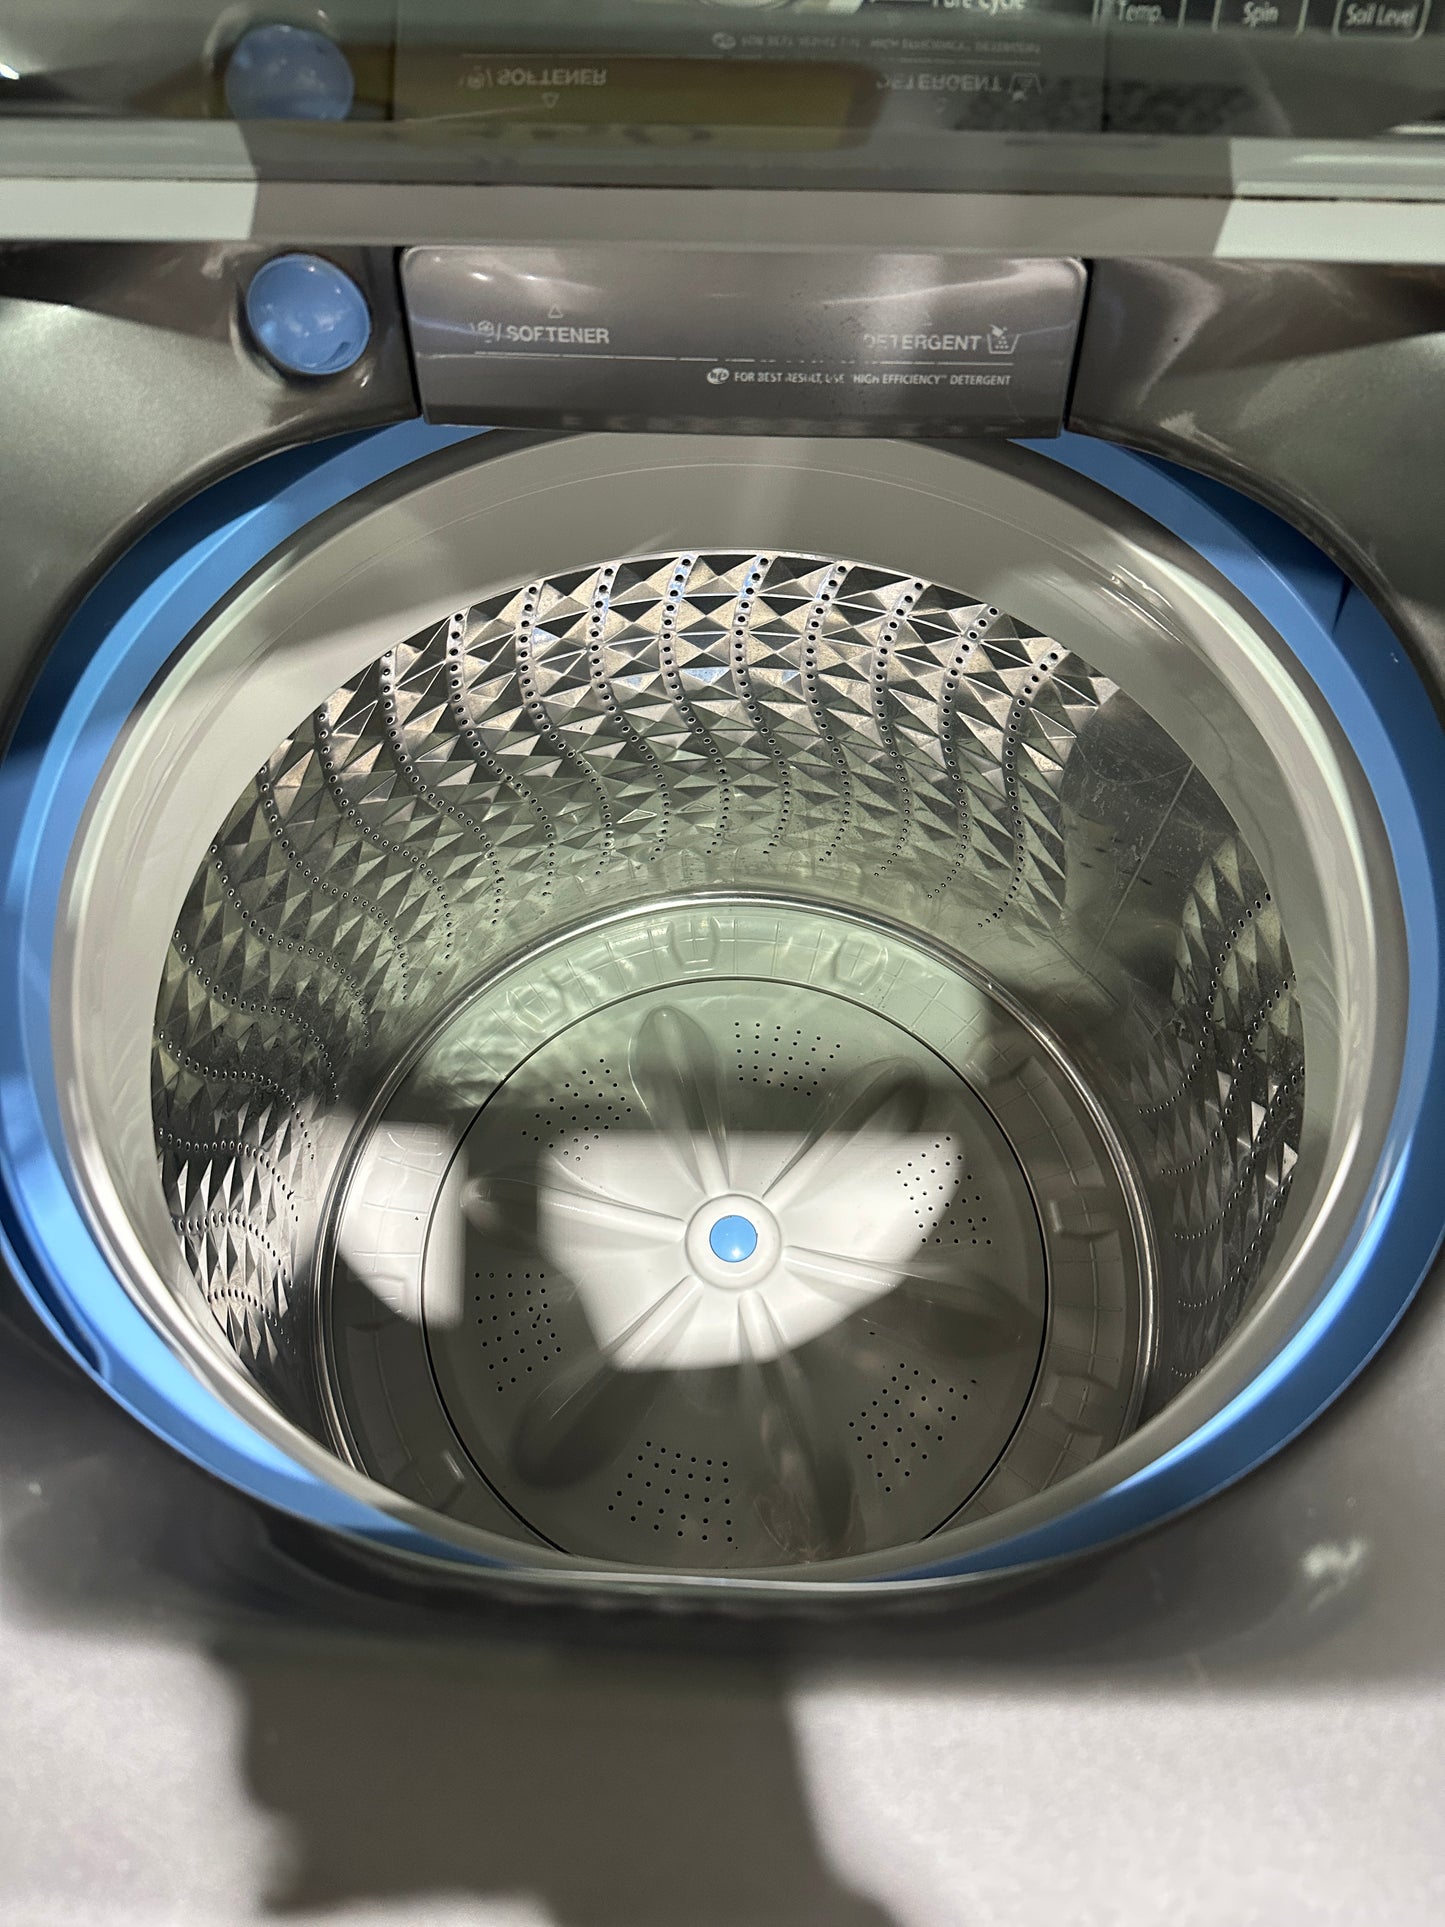 GREAT TOP LOAD WASHER - GENTLY USED - MODEL: wa456drhdsu  WAS12093S